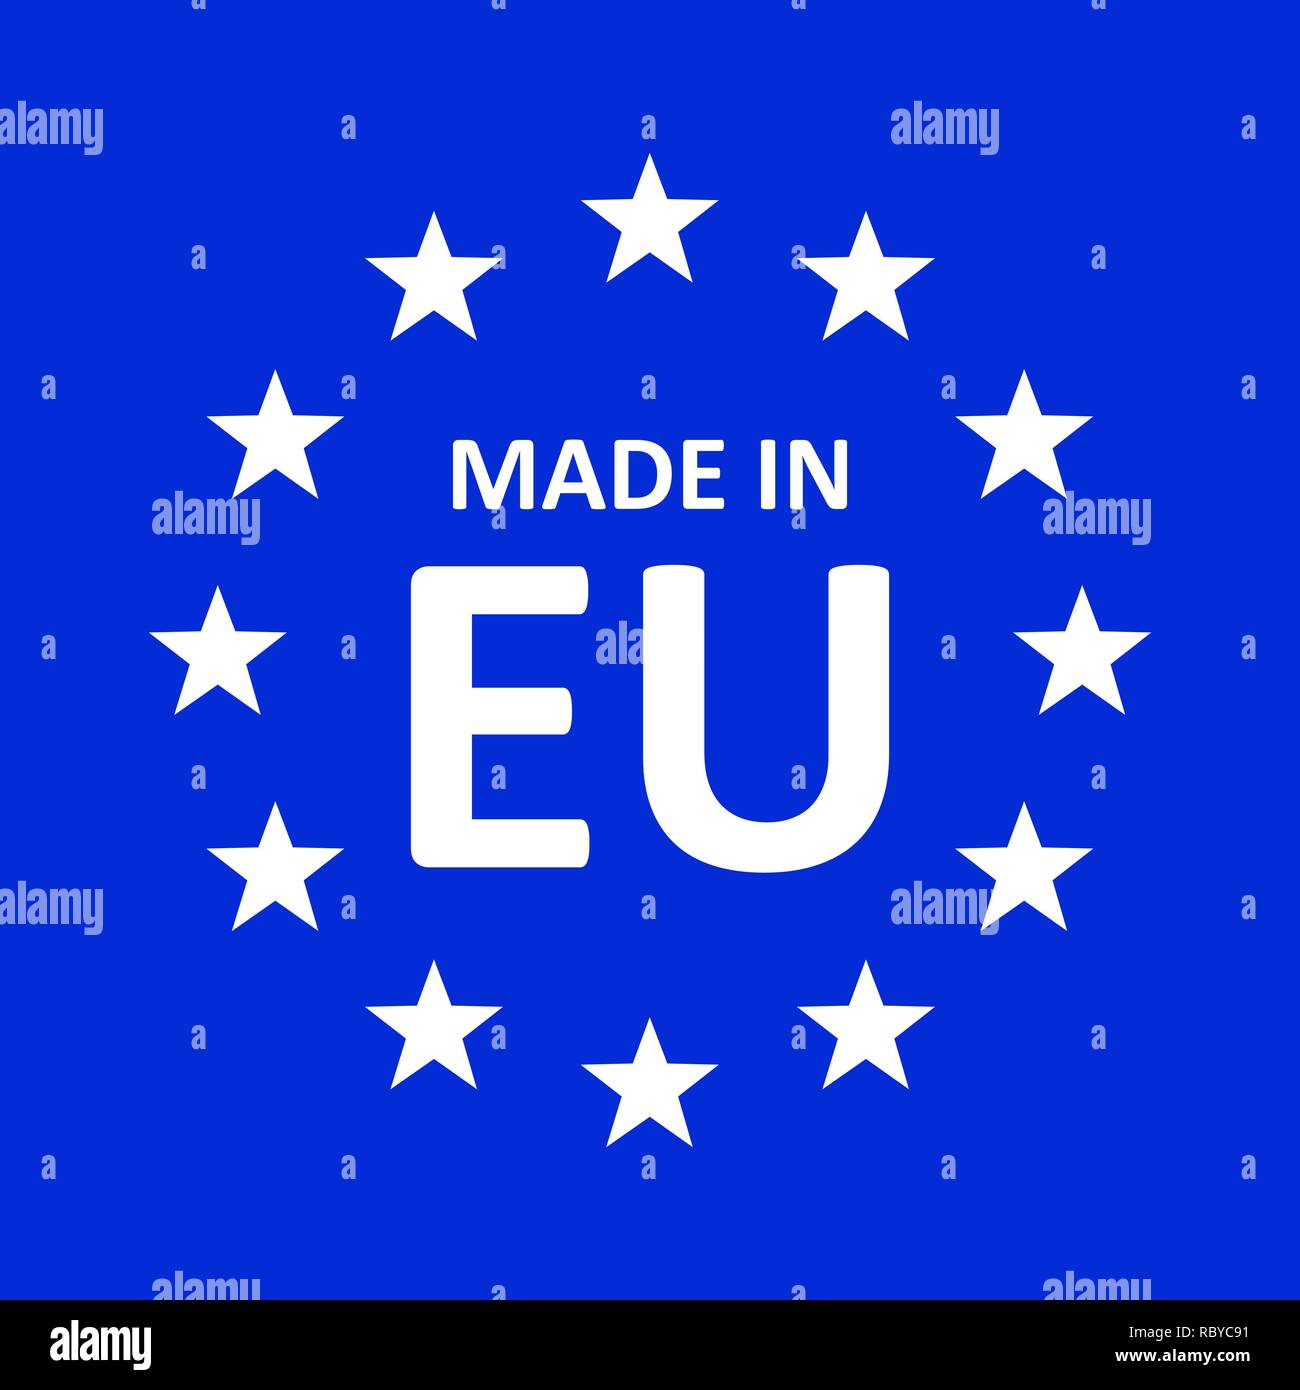 Made In Europe icon in flat style. Vector illustration. Export production symbol with stars. Stock Vector